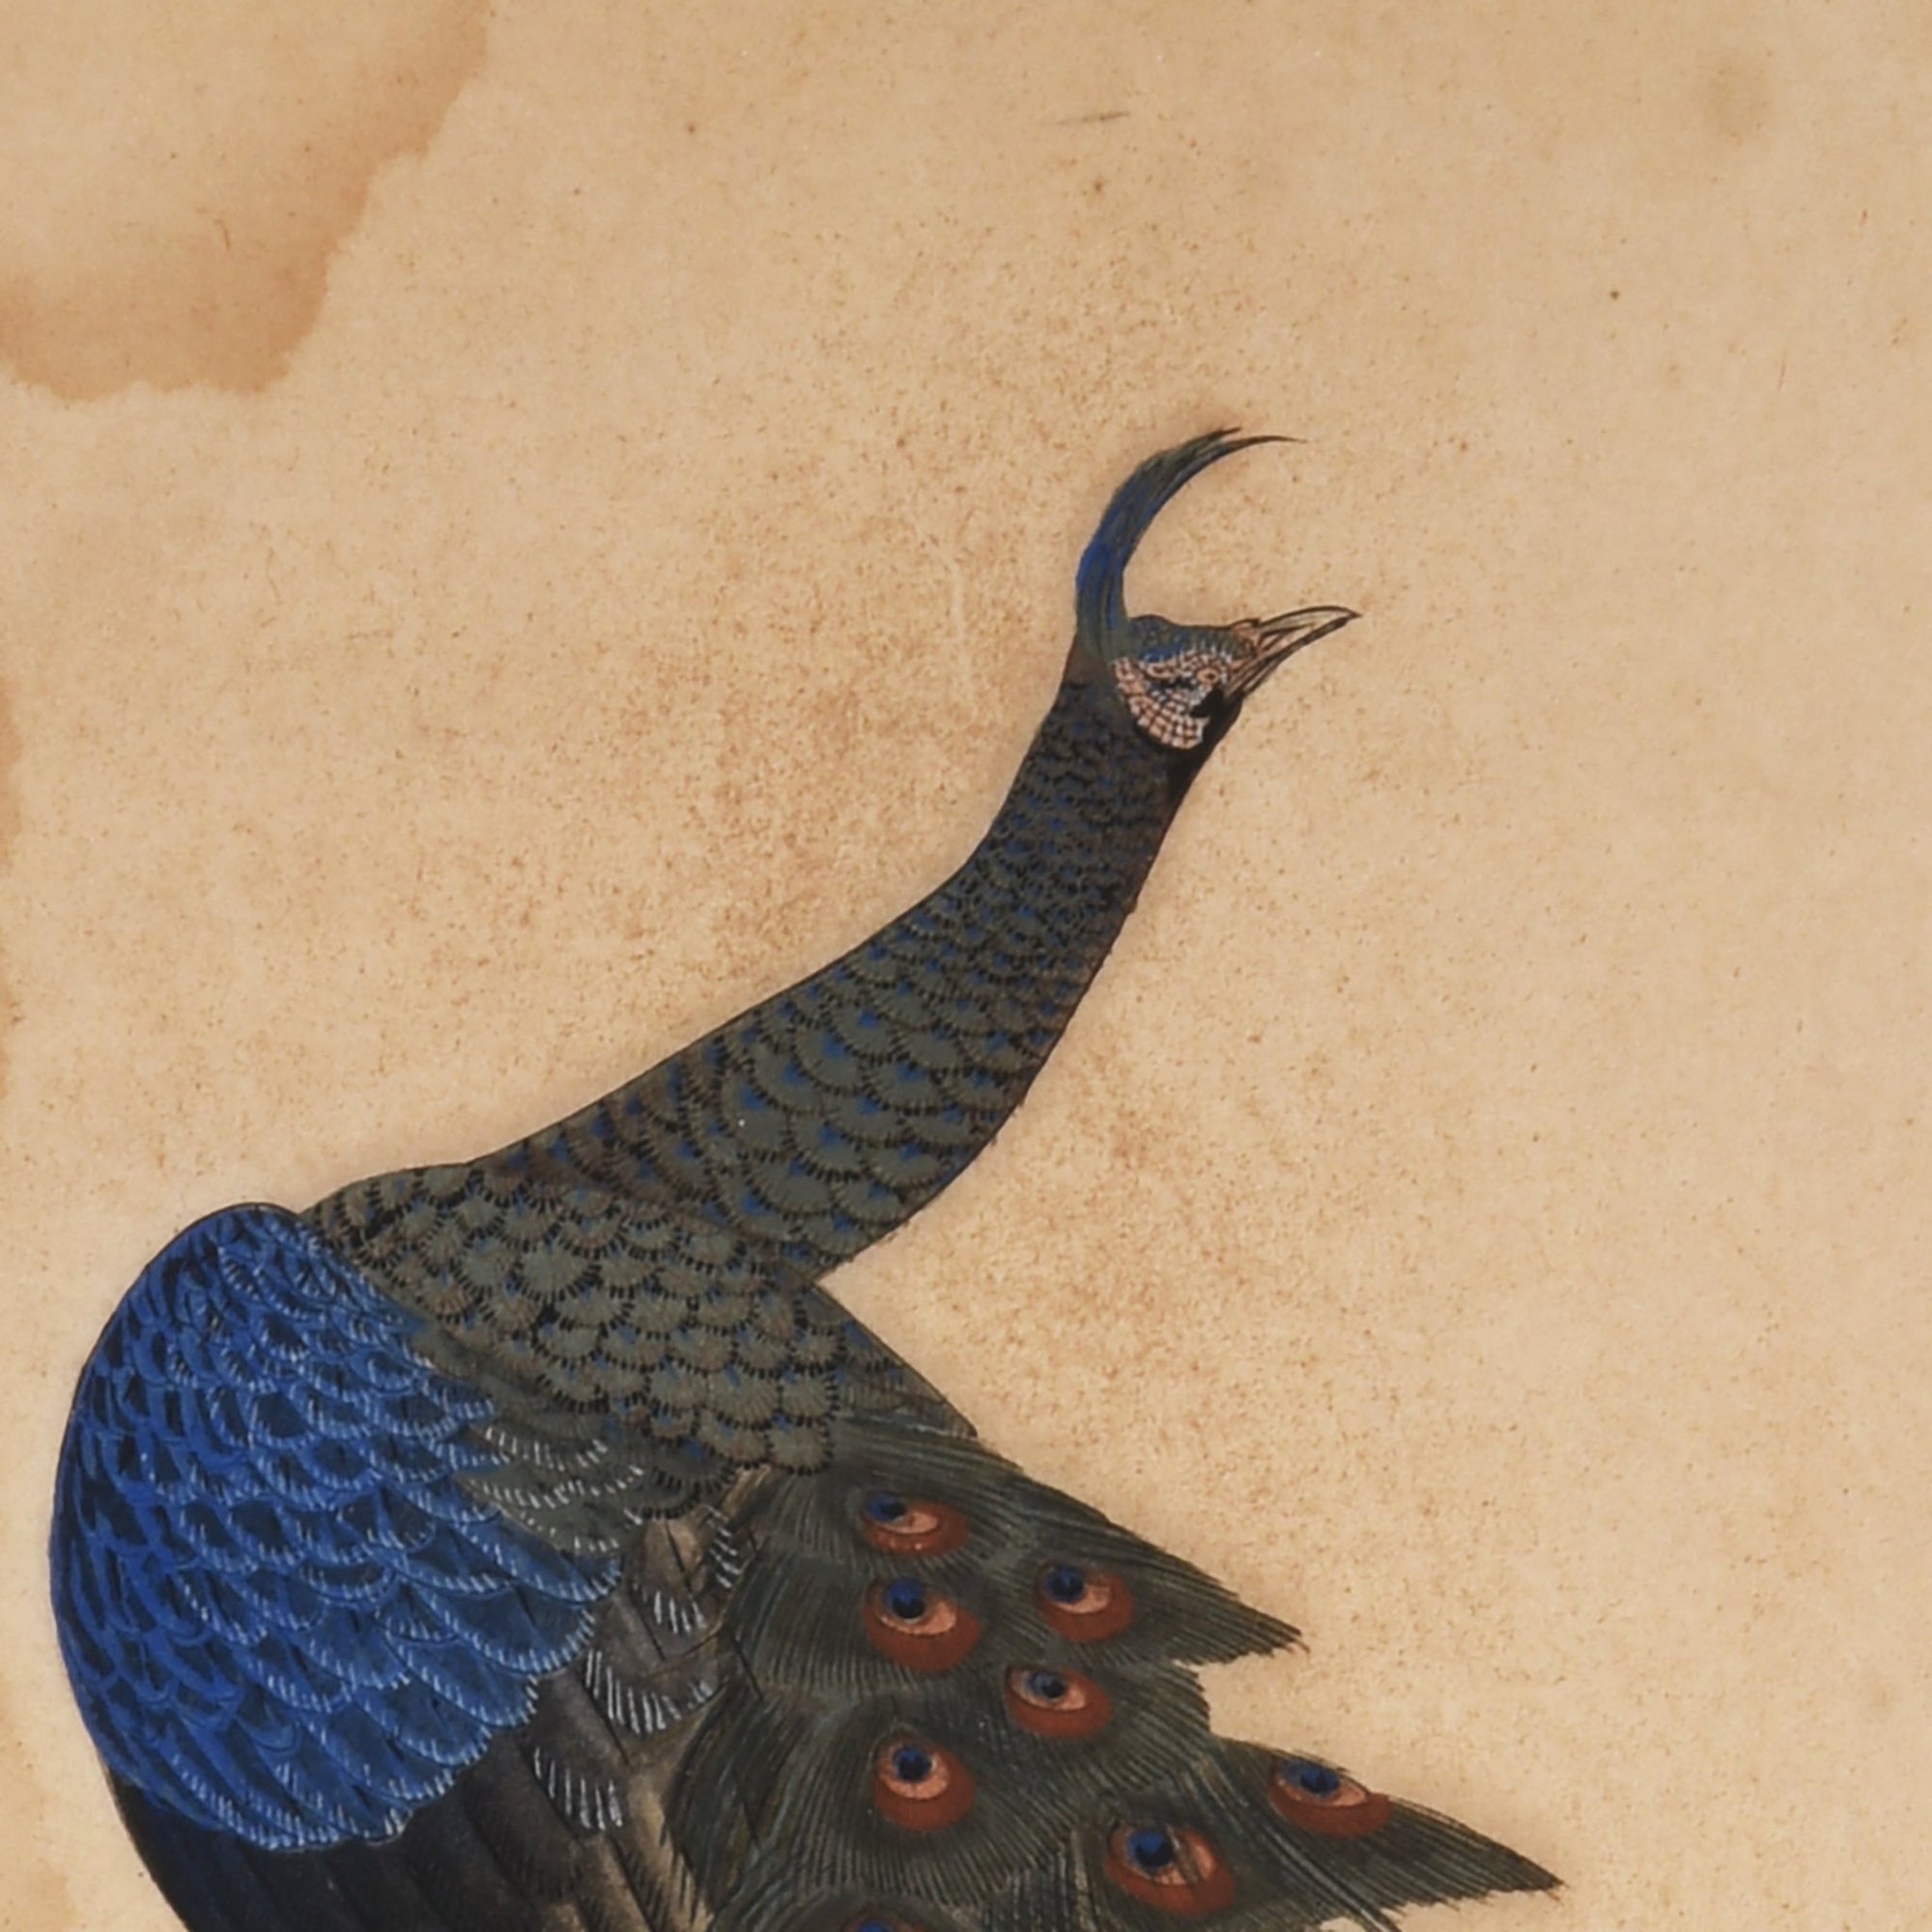 Japanese Painting of Peacock - 36 x 1.5 x 55 cms - M241